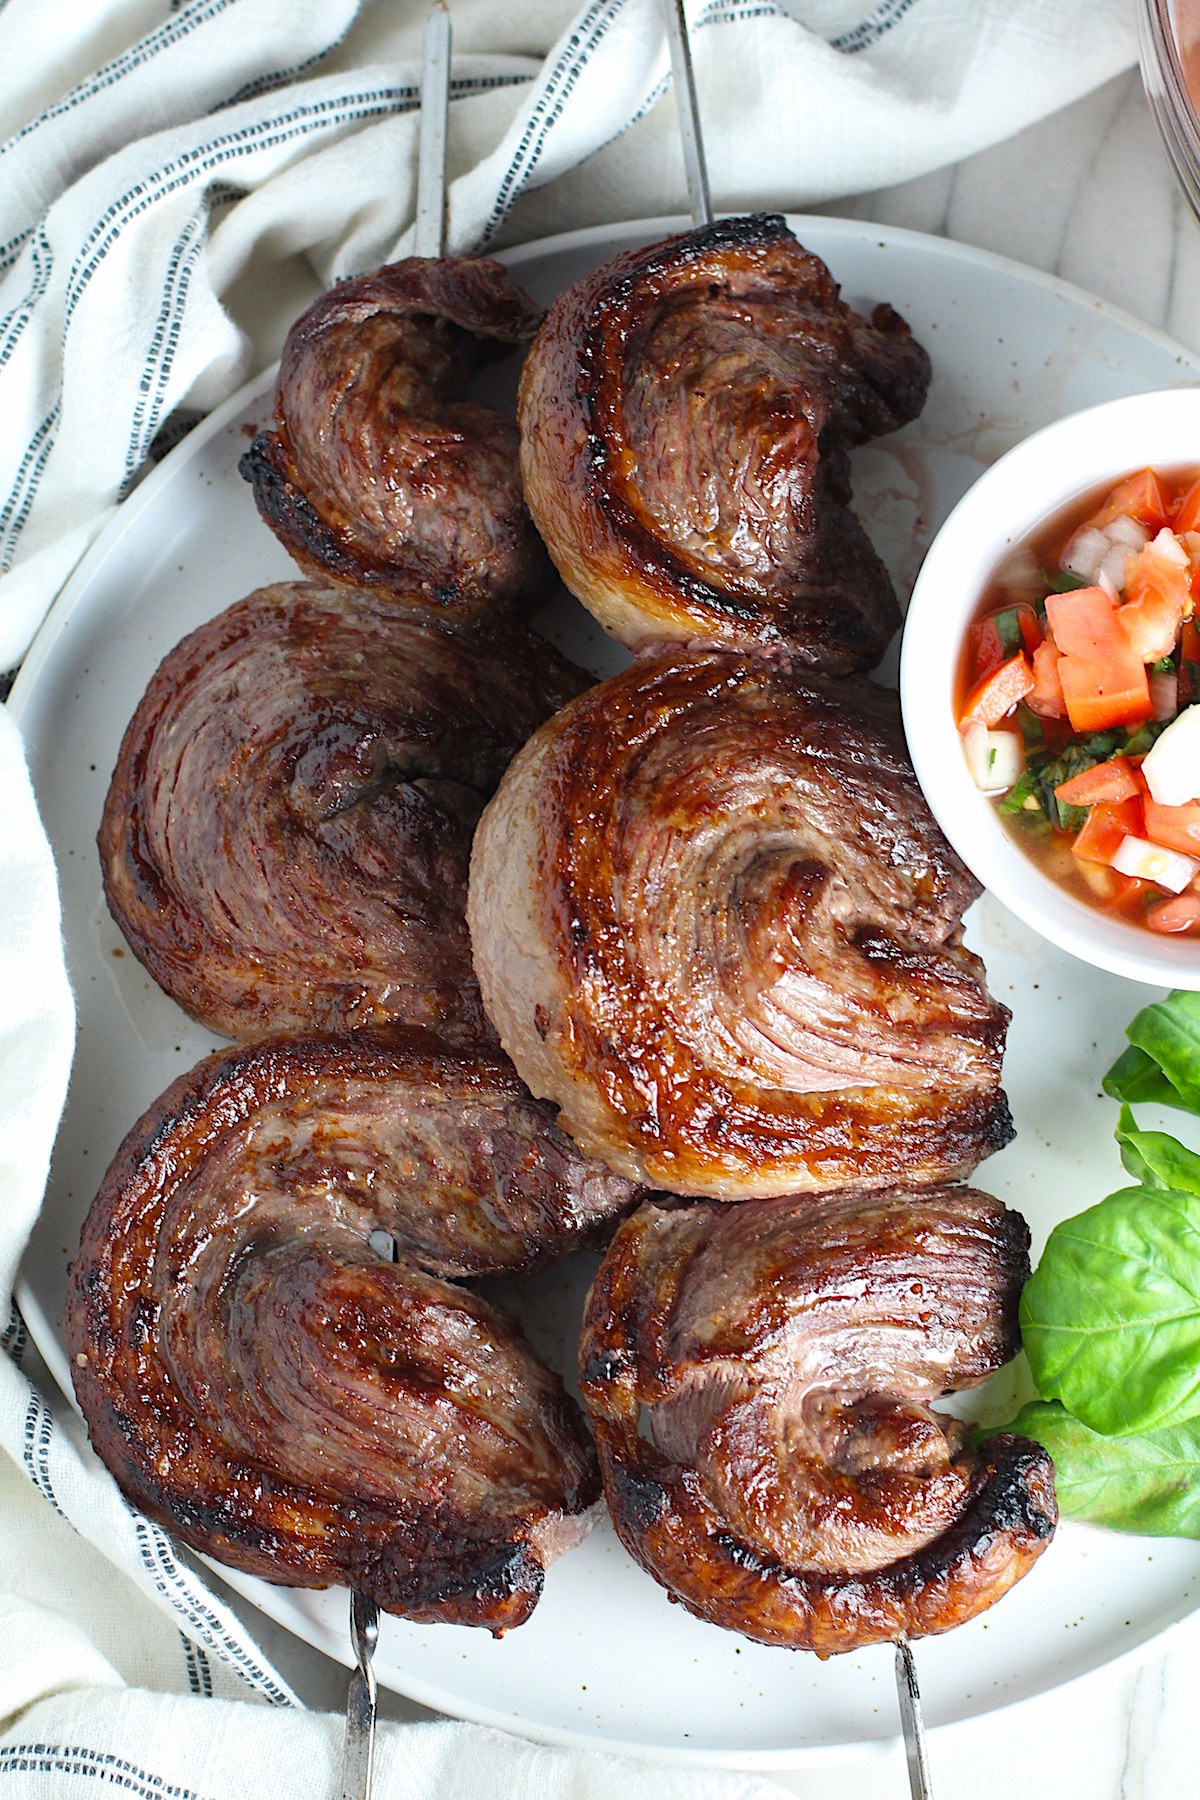 Picanha steak skewered on a plate with a tomato salad and basil leaves.  It's the best Brazilian steak recipe, a tender and delicious cut of beef seasoned with a Brazilian blend and grilled perfectly!